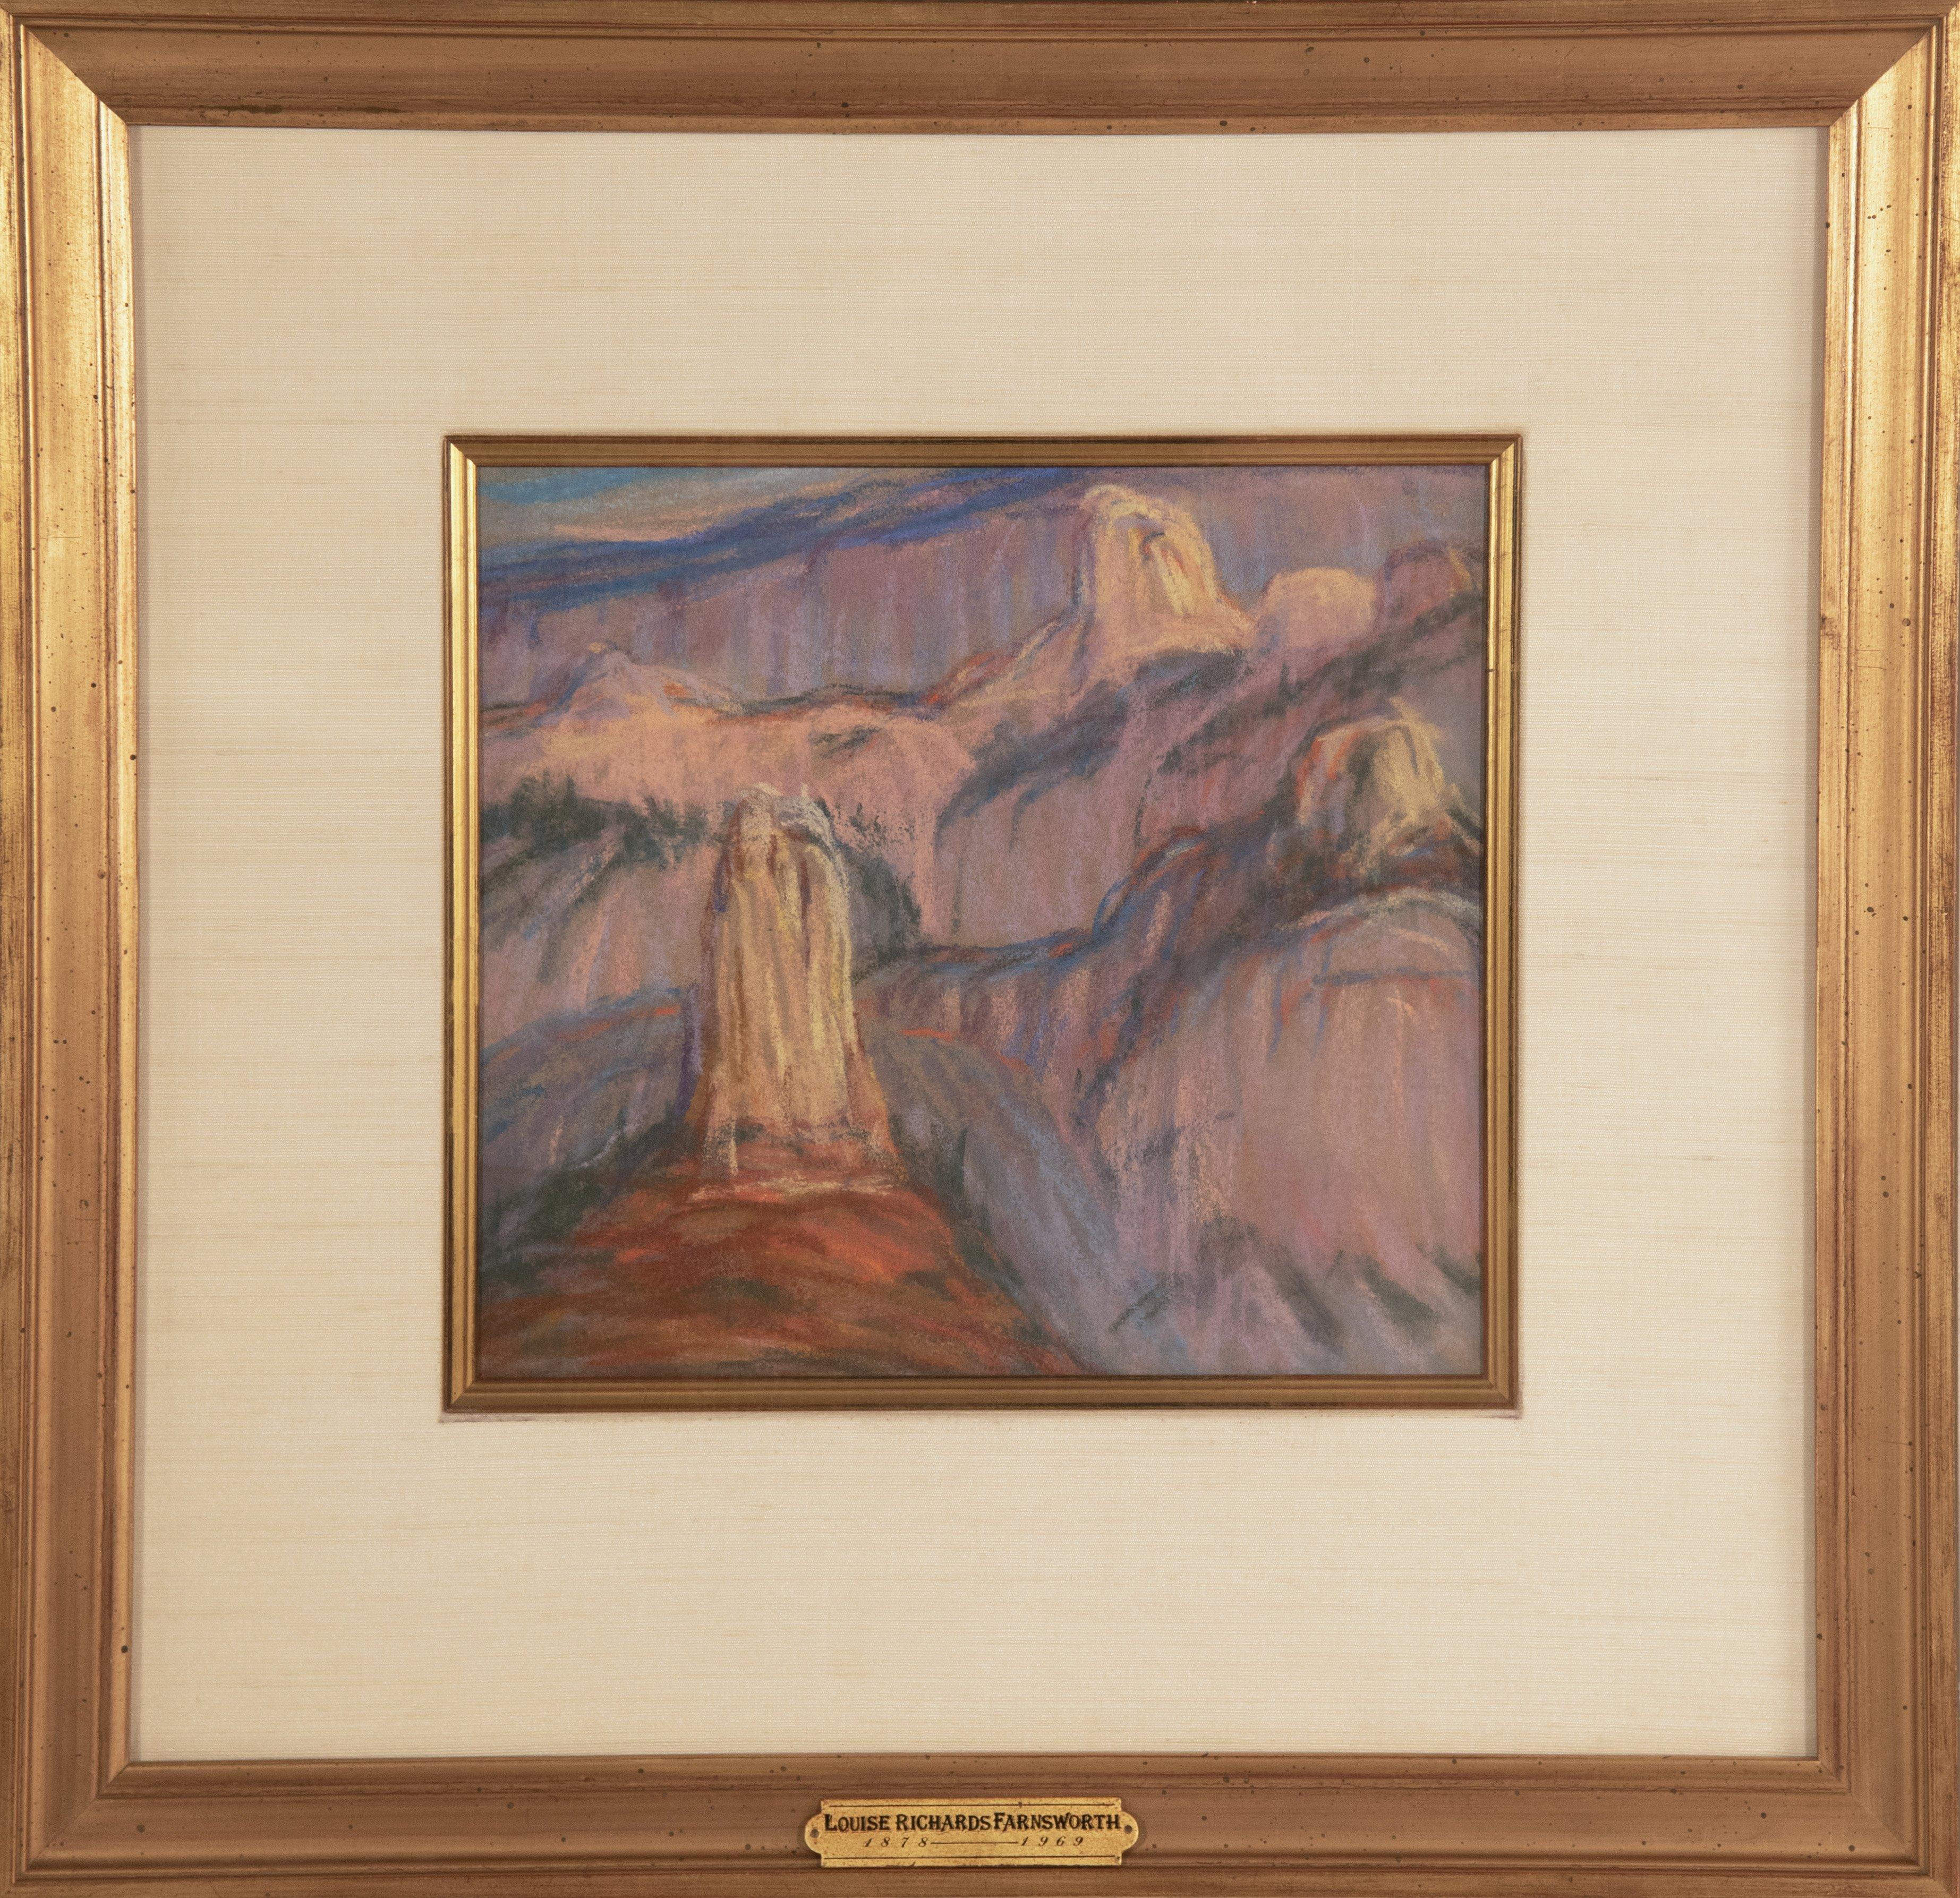 Louise Richards Farnsworth Landscape Painting - Colorful Southern Utah